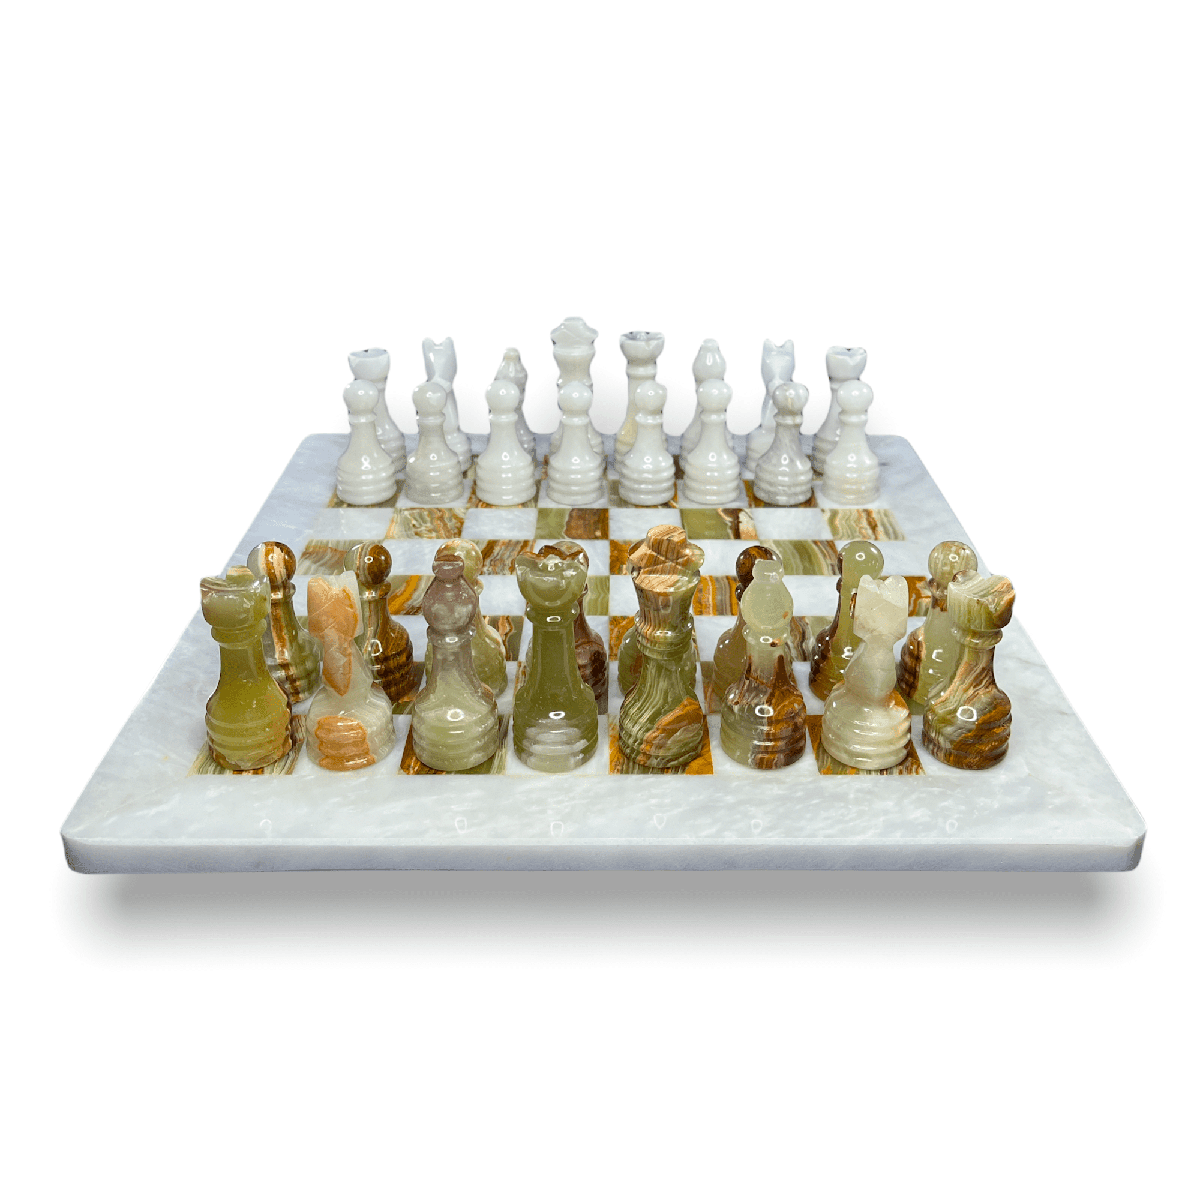 Marble Chess Set with Storage Case - White and Onyx - Marble Cultures